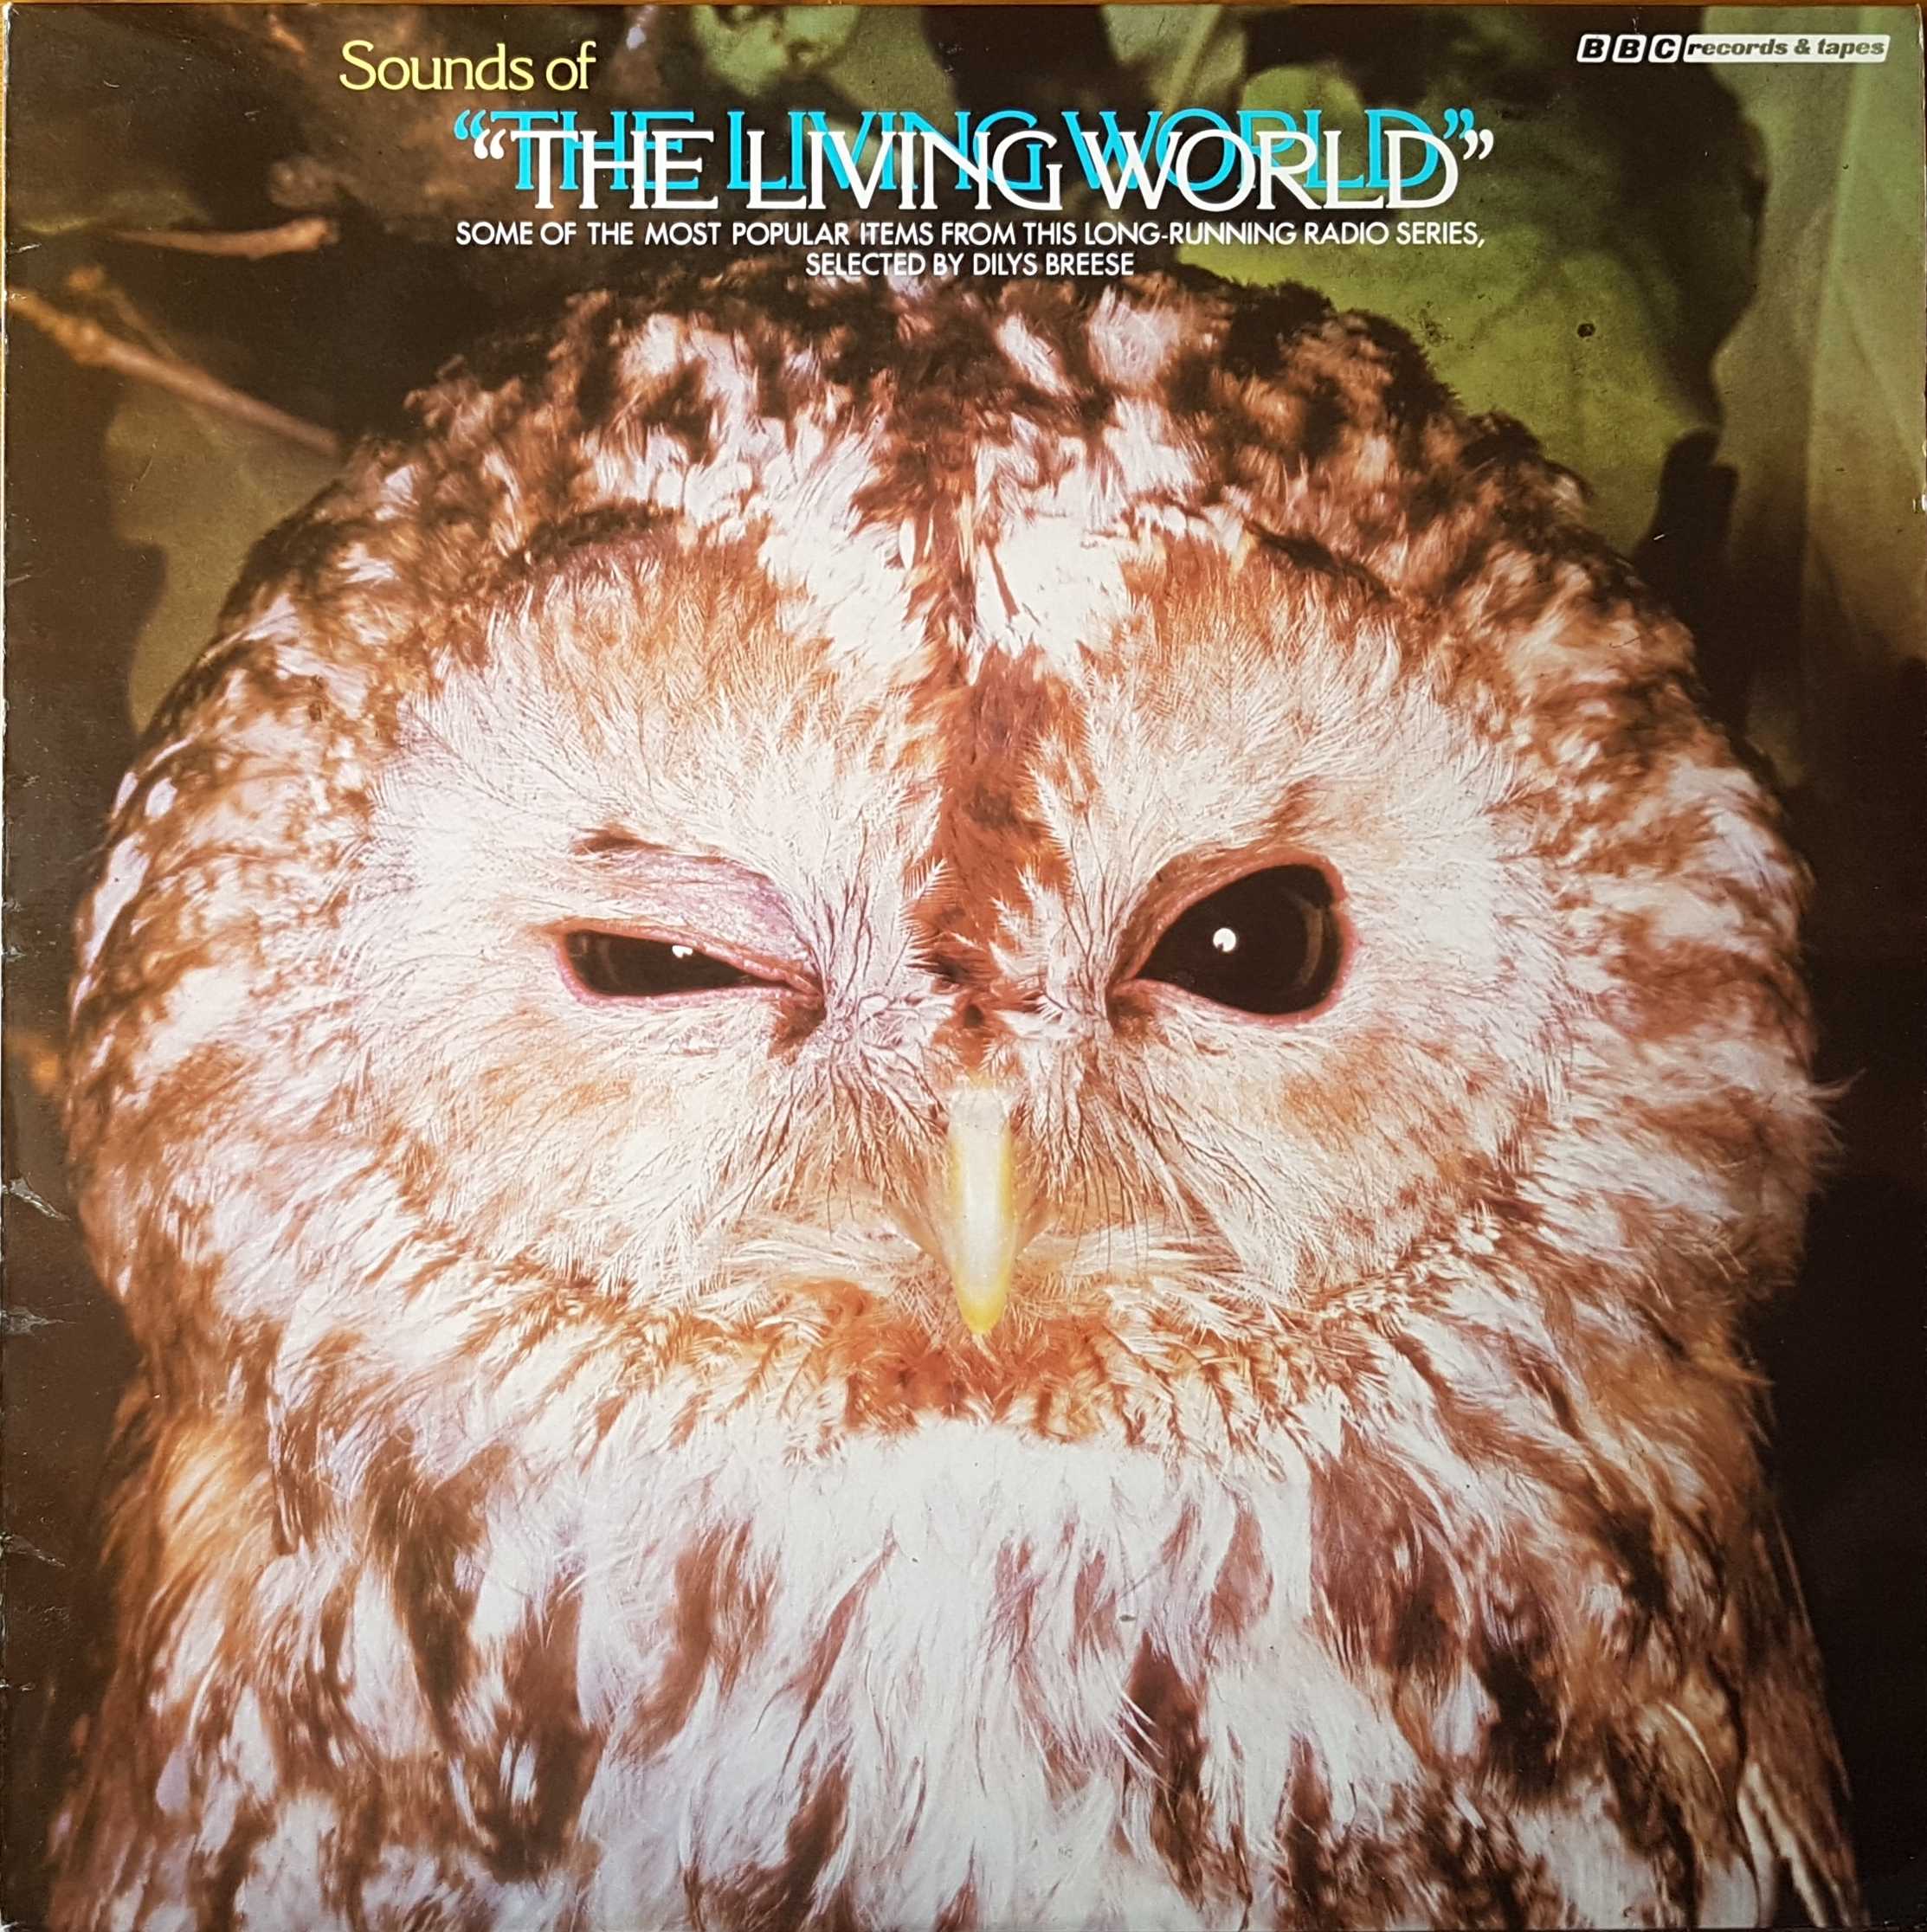 Picture of REC 321 Sounds of the living World by artist Dilys Breese from the BBC records and Tapes library